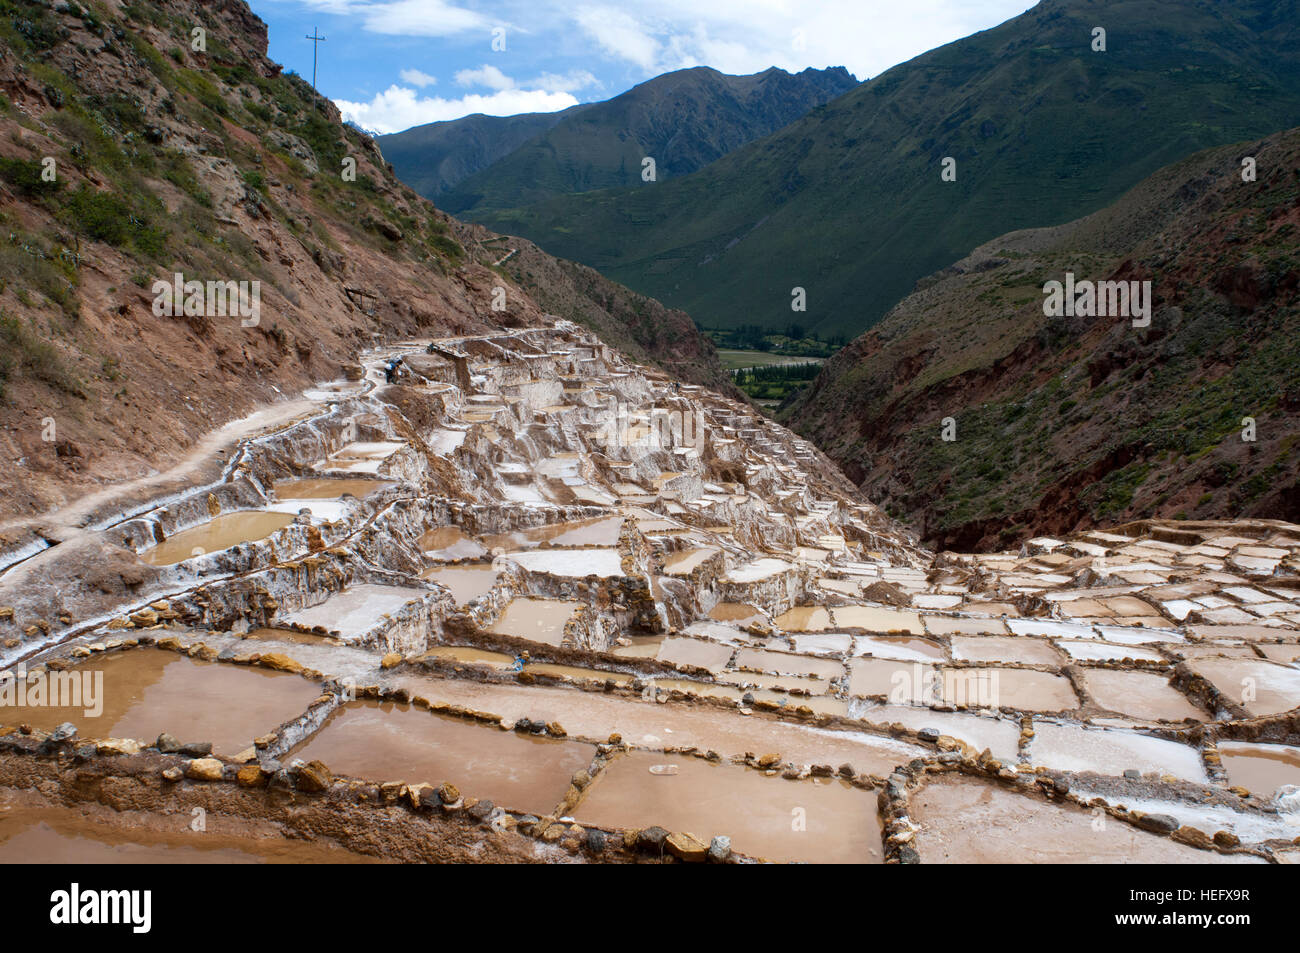 General view of the Sacred Valley near Cuzco from the salt mines of Maras. The Sacred Valley of the Incas or the Urubamba Valley is a valley in the An Stock Photo